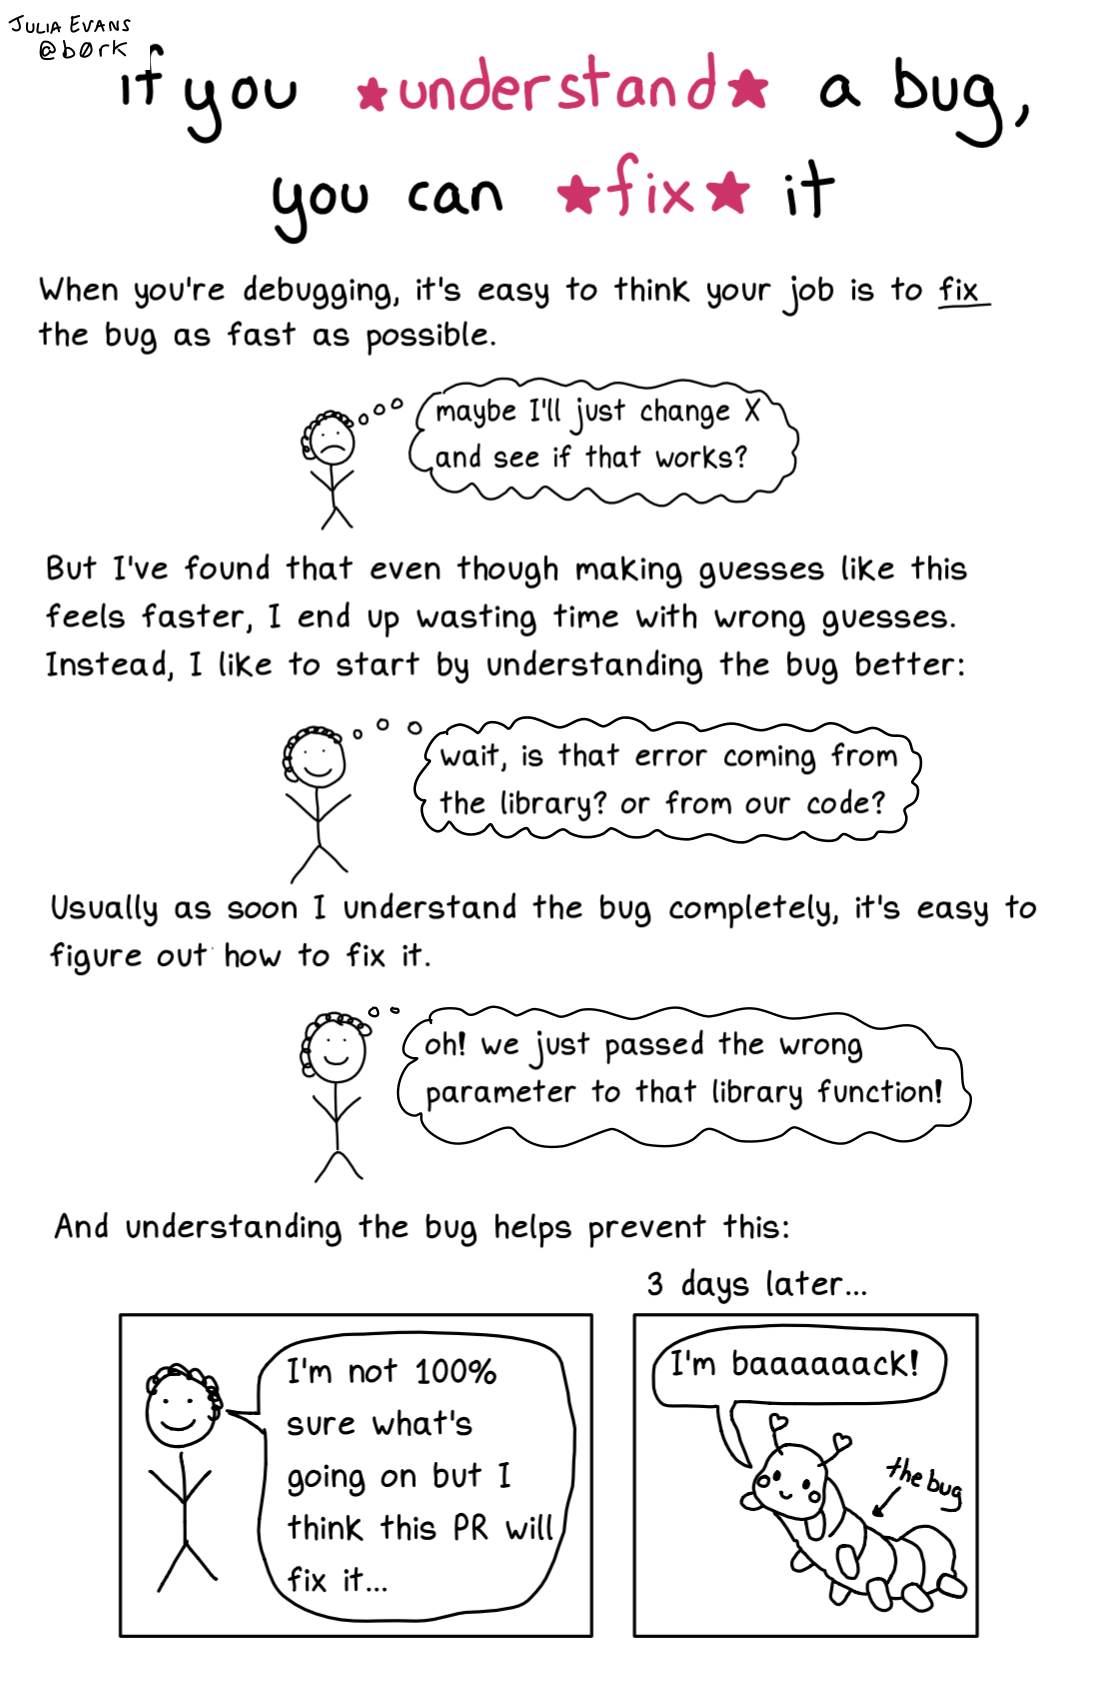 Image of a comic. To read the full HTML alt text, click "read the transcript".